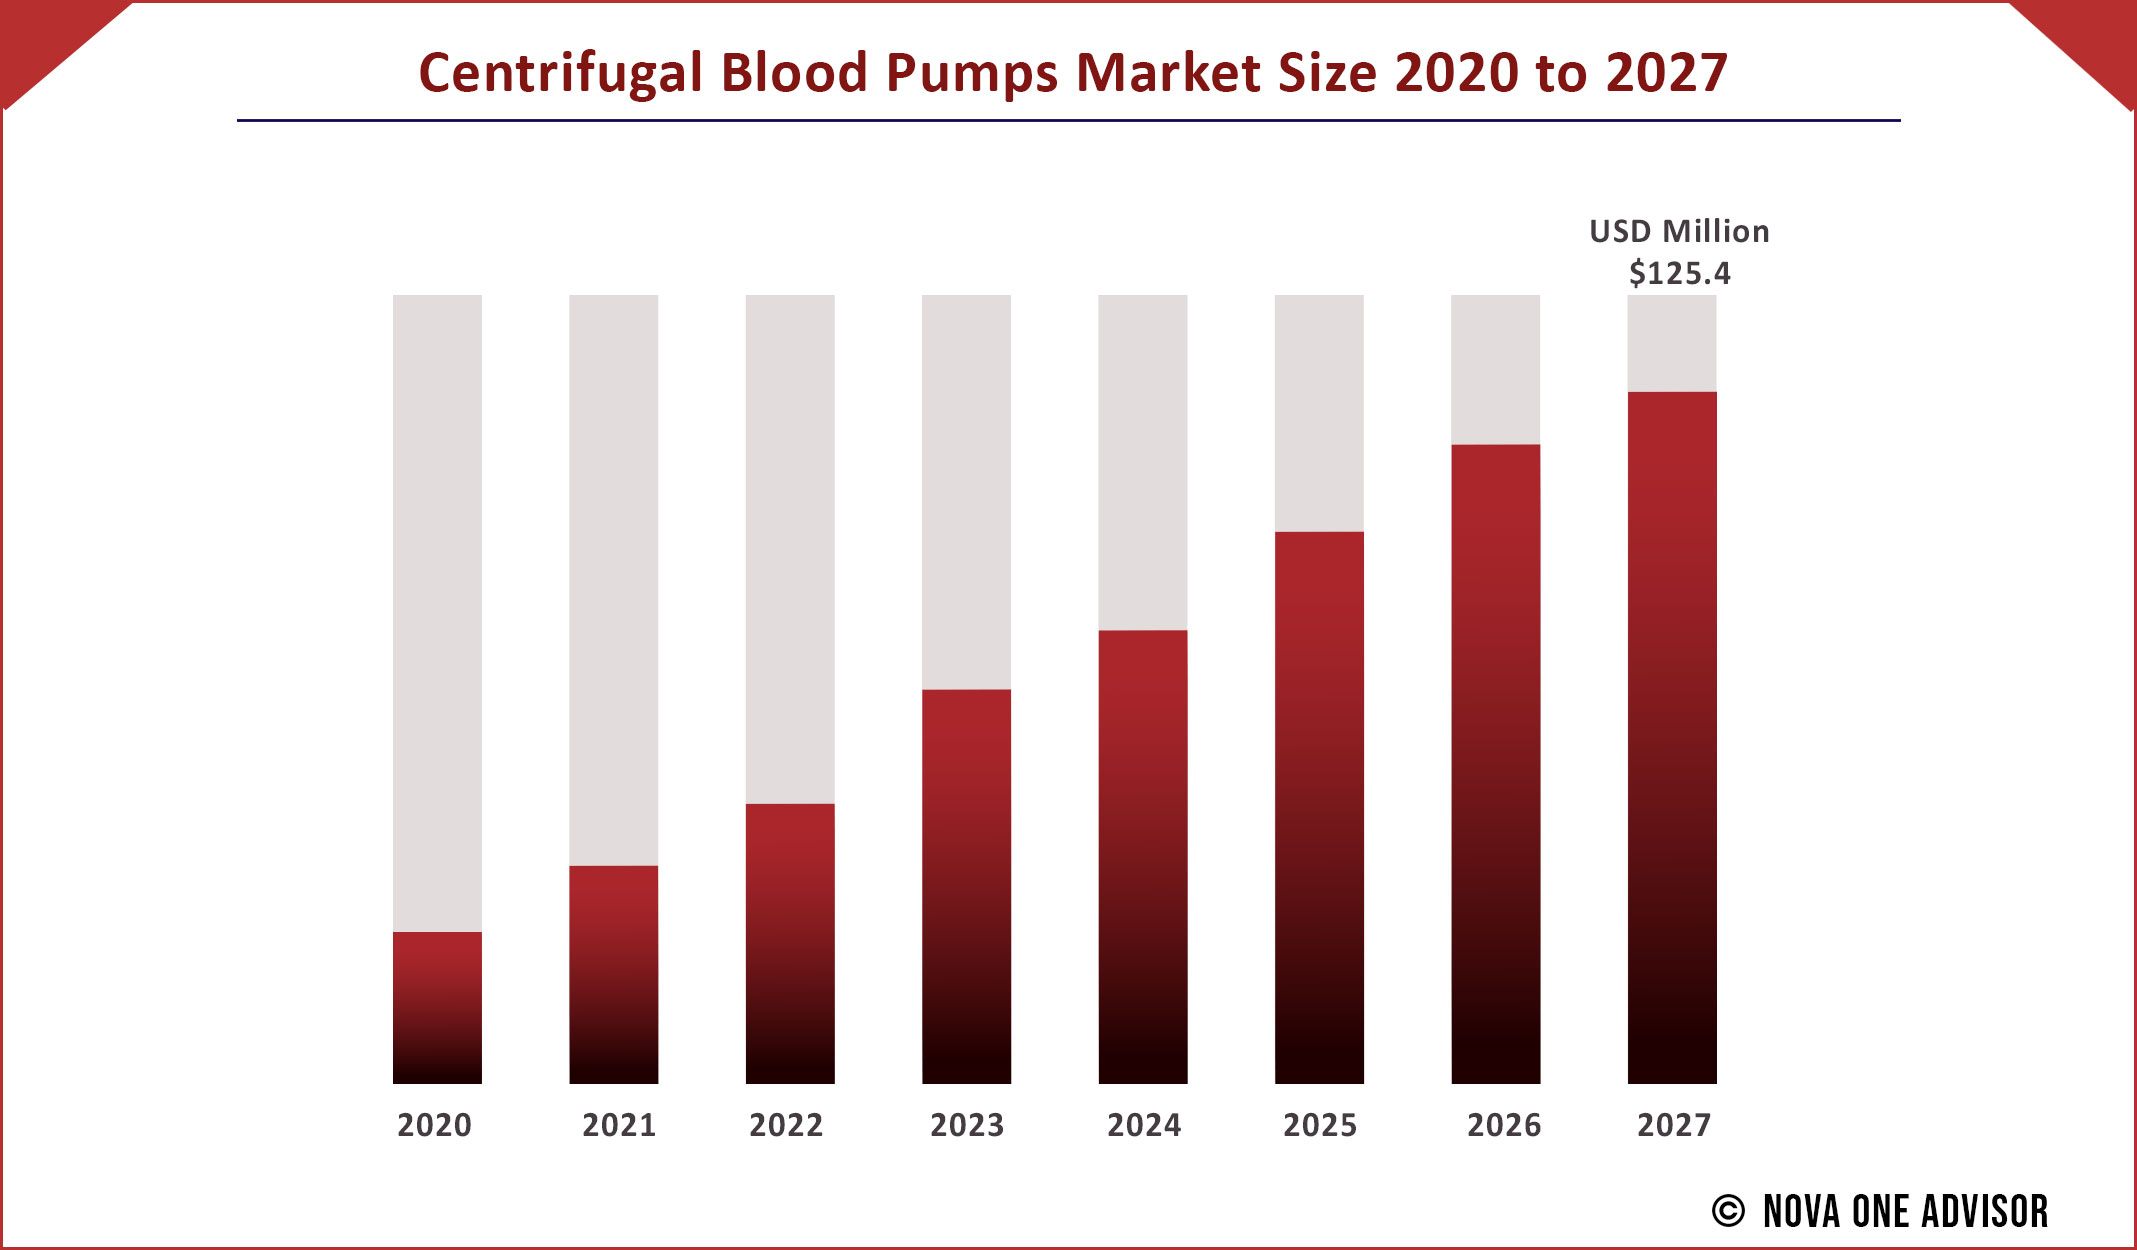 Centrifugal Blood Pumps Market Size 2020 to 2027